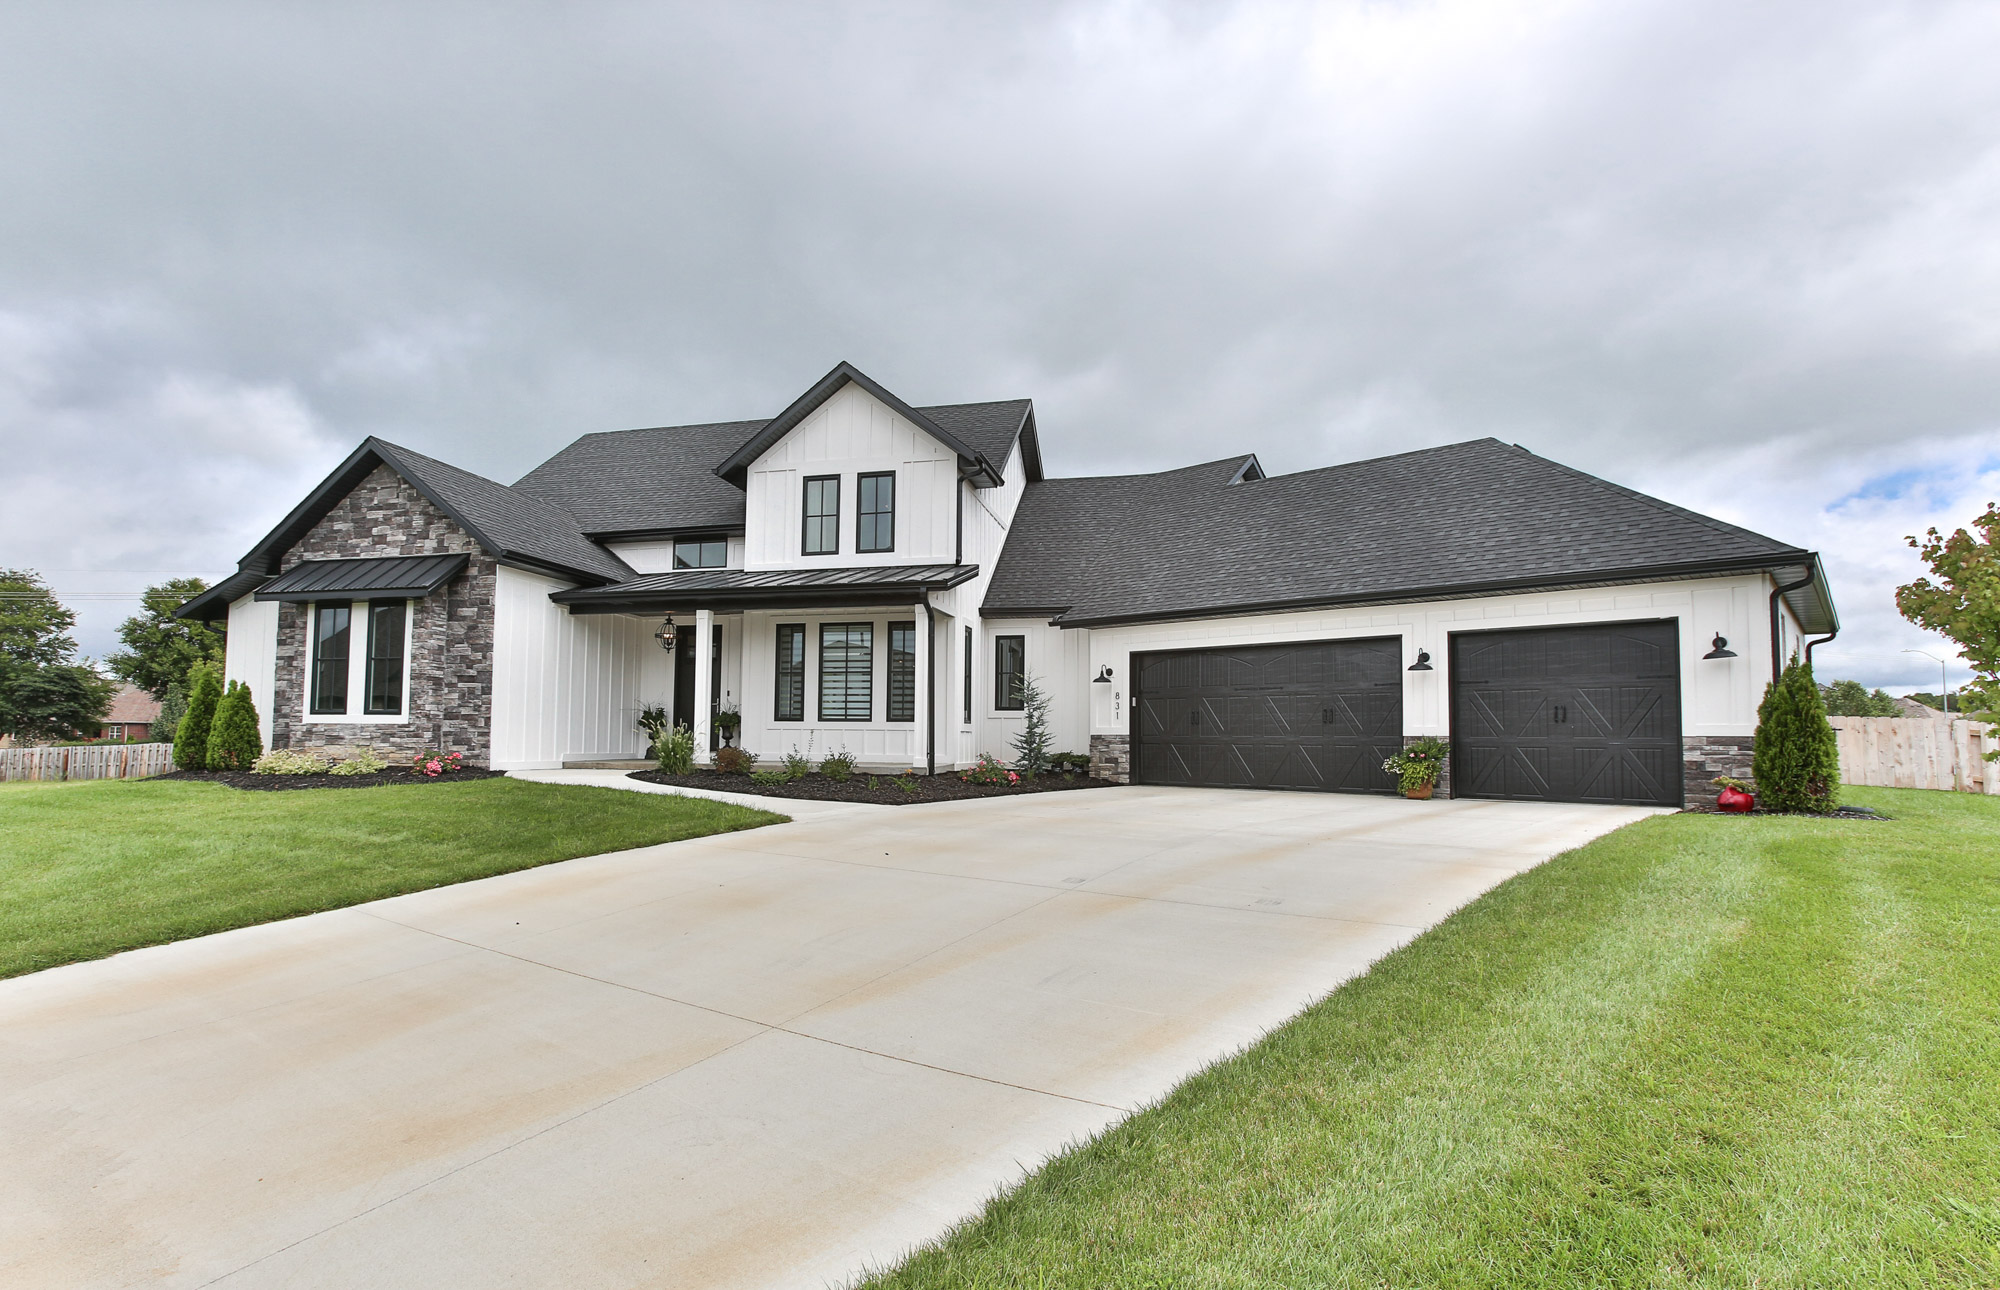 Front view by driveway two-story house green grass three-car garage abby-farm-house-2